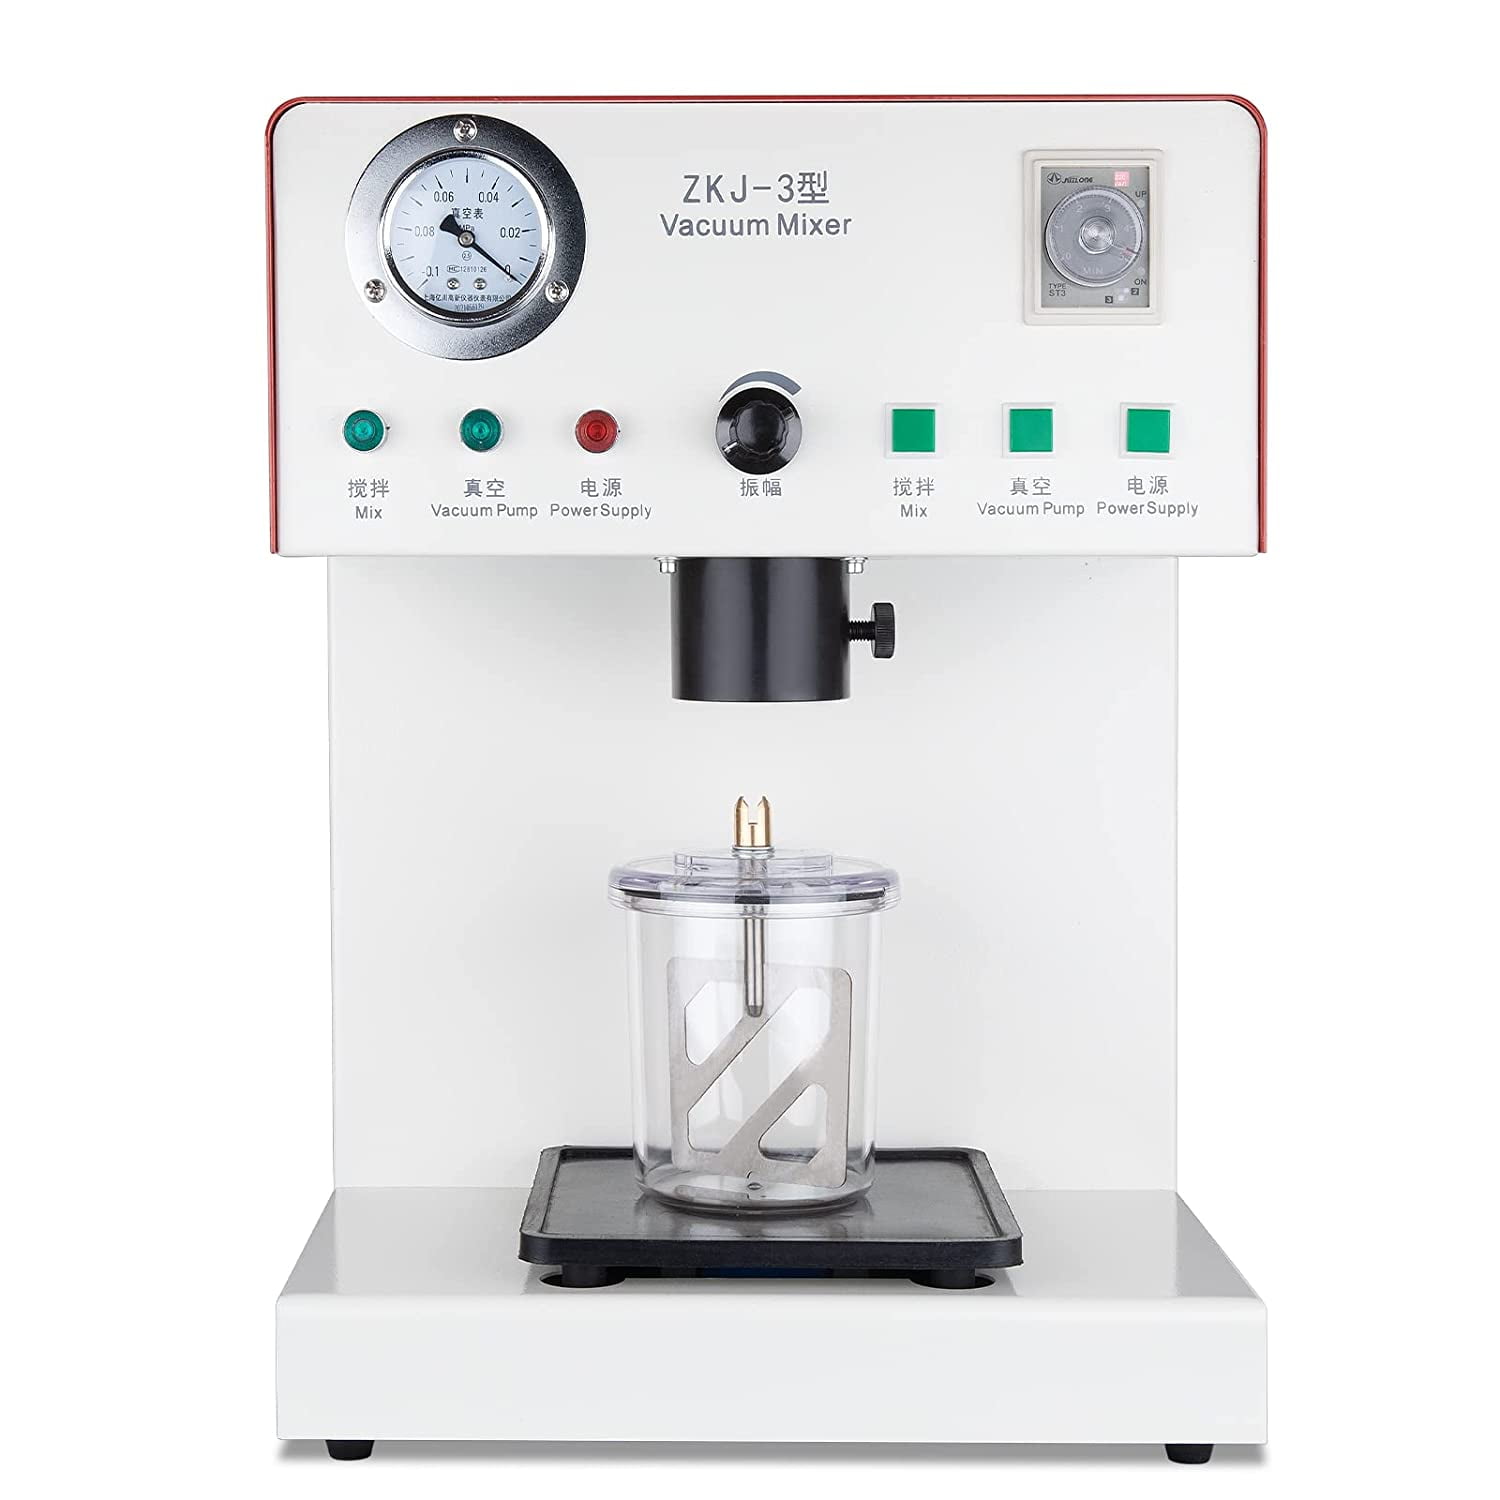 Lab Resin Mixer W/Wd Paddles (100)&12Vac, Lab Resin Mixers, Mixers,  Stirrers, Shakers, Dispersion and Lab Mixers, Products